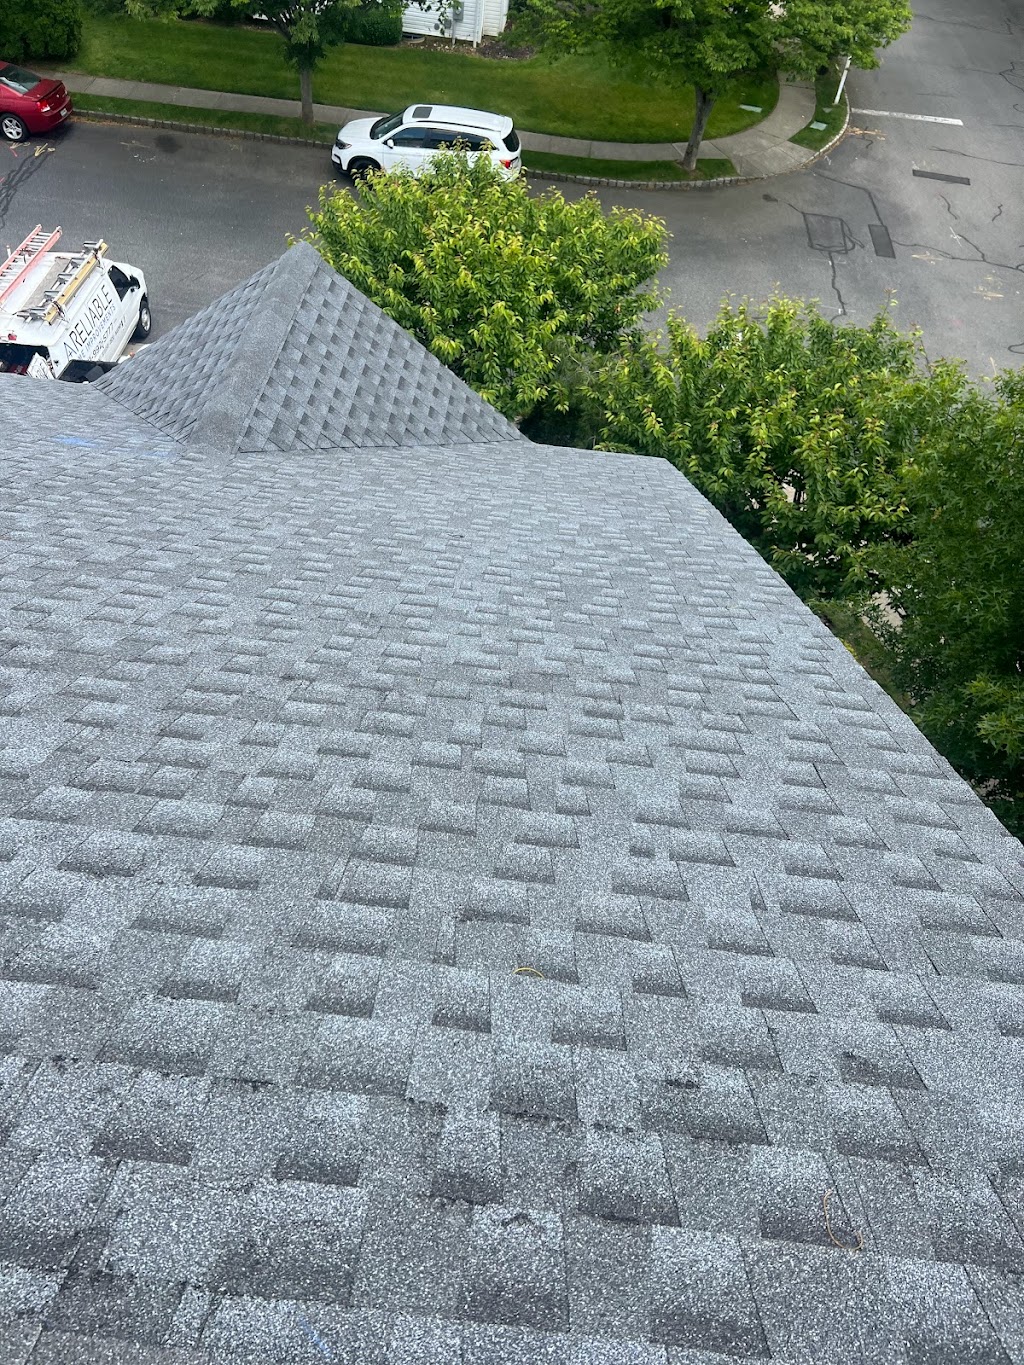 A Plus Reliable Roofing And Chimney | 2 Katie Dr, Medford, NY 11763 | Phone: (631) 312-6848